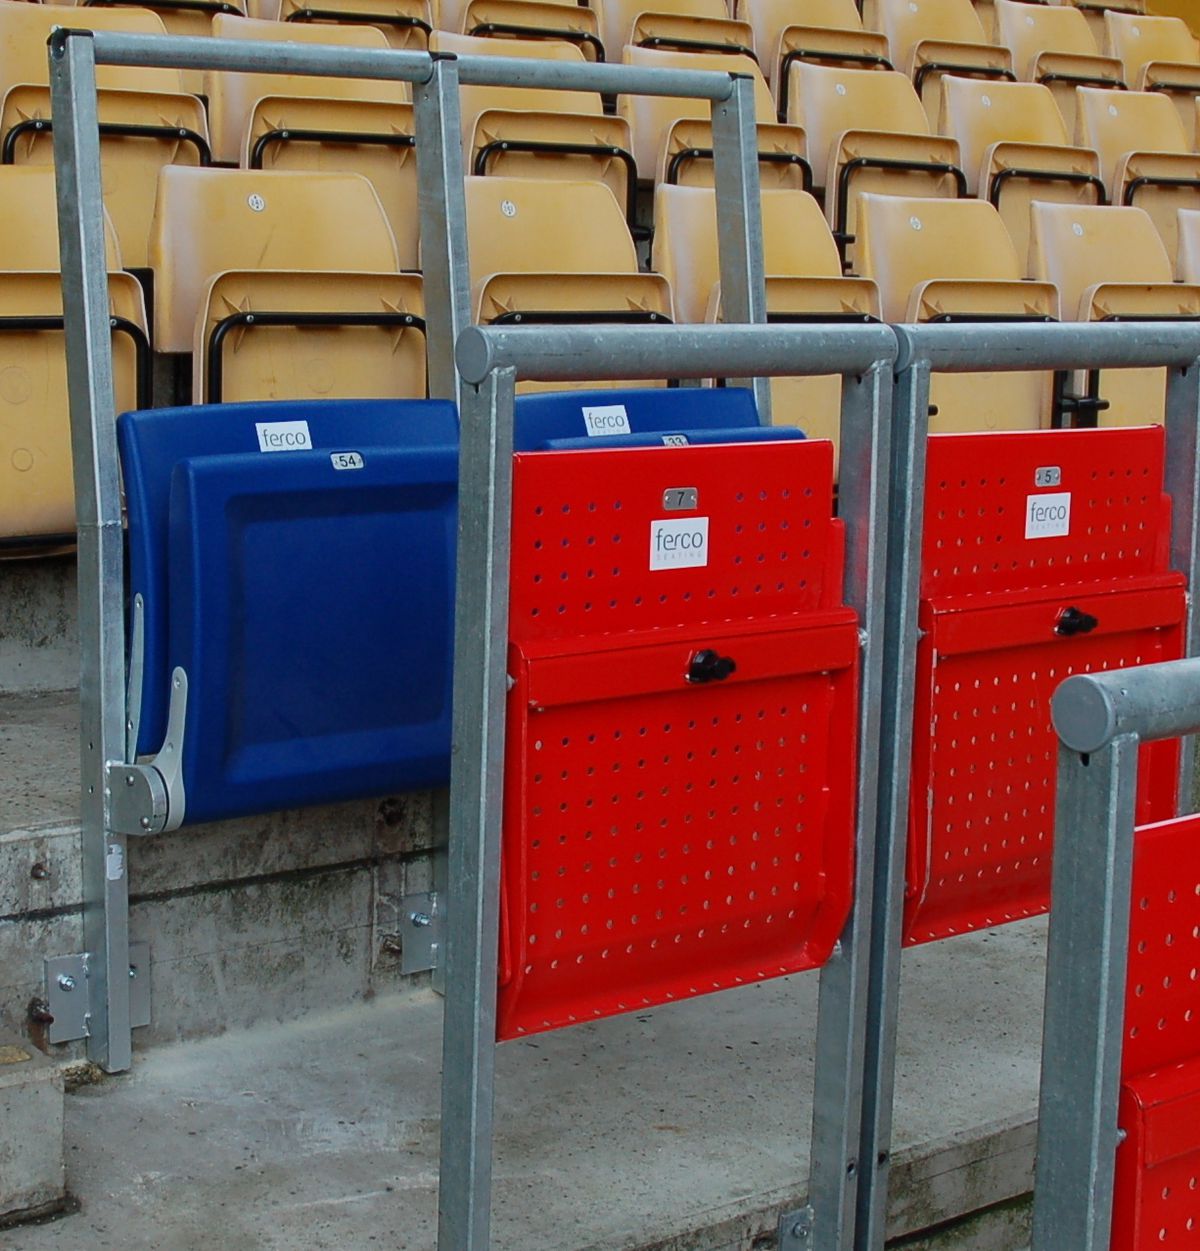  Safe standing seat options installed at Molineux